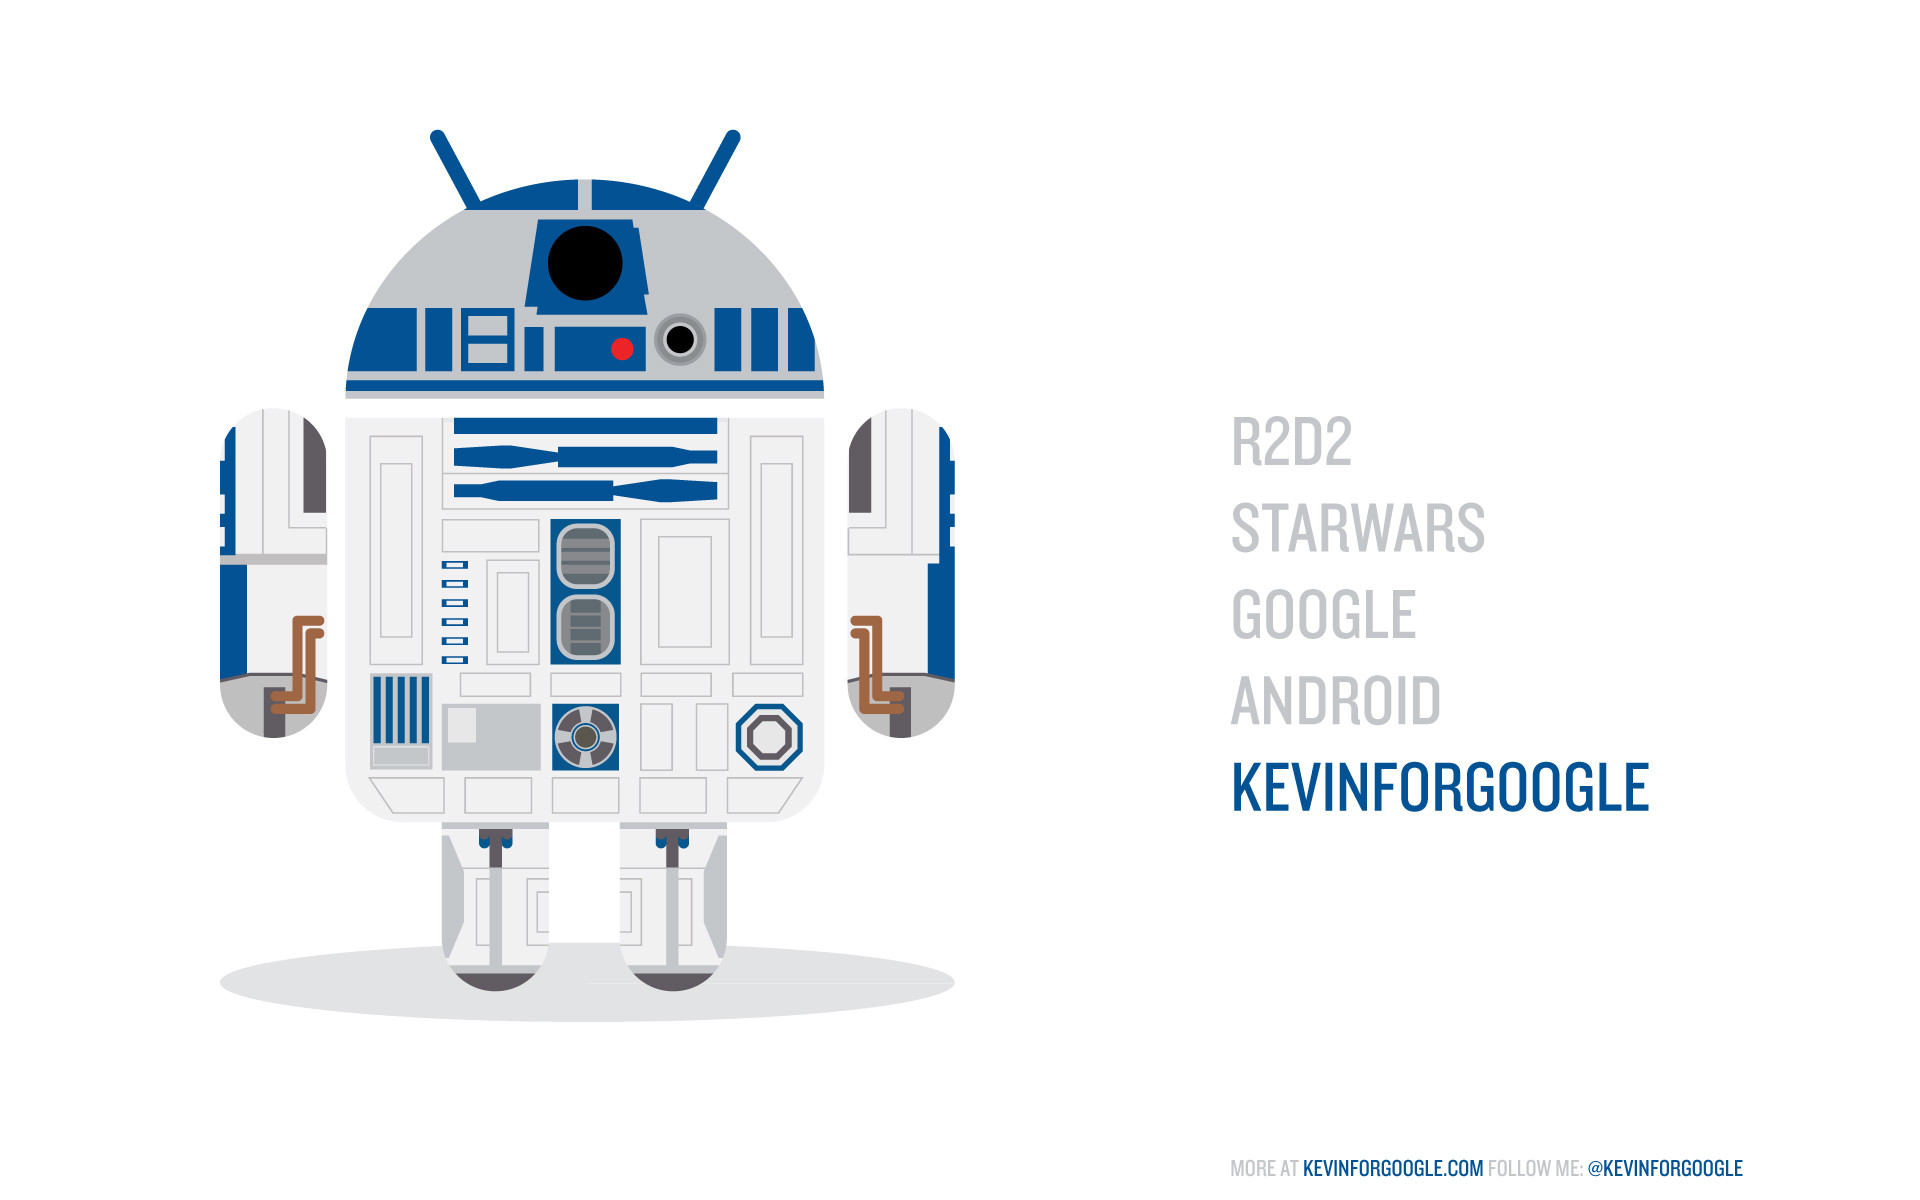 R2d2 Android Wallpaper